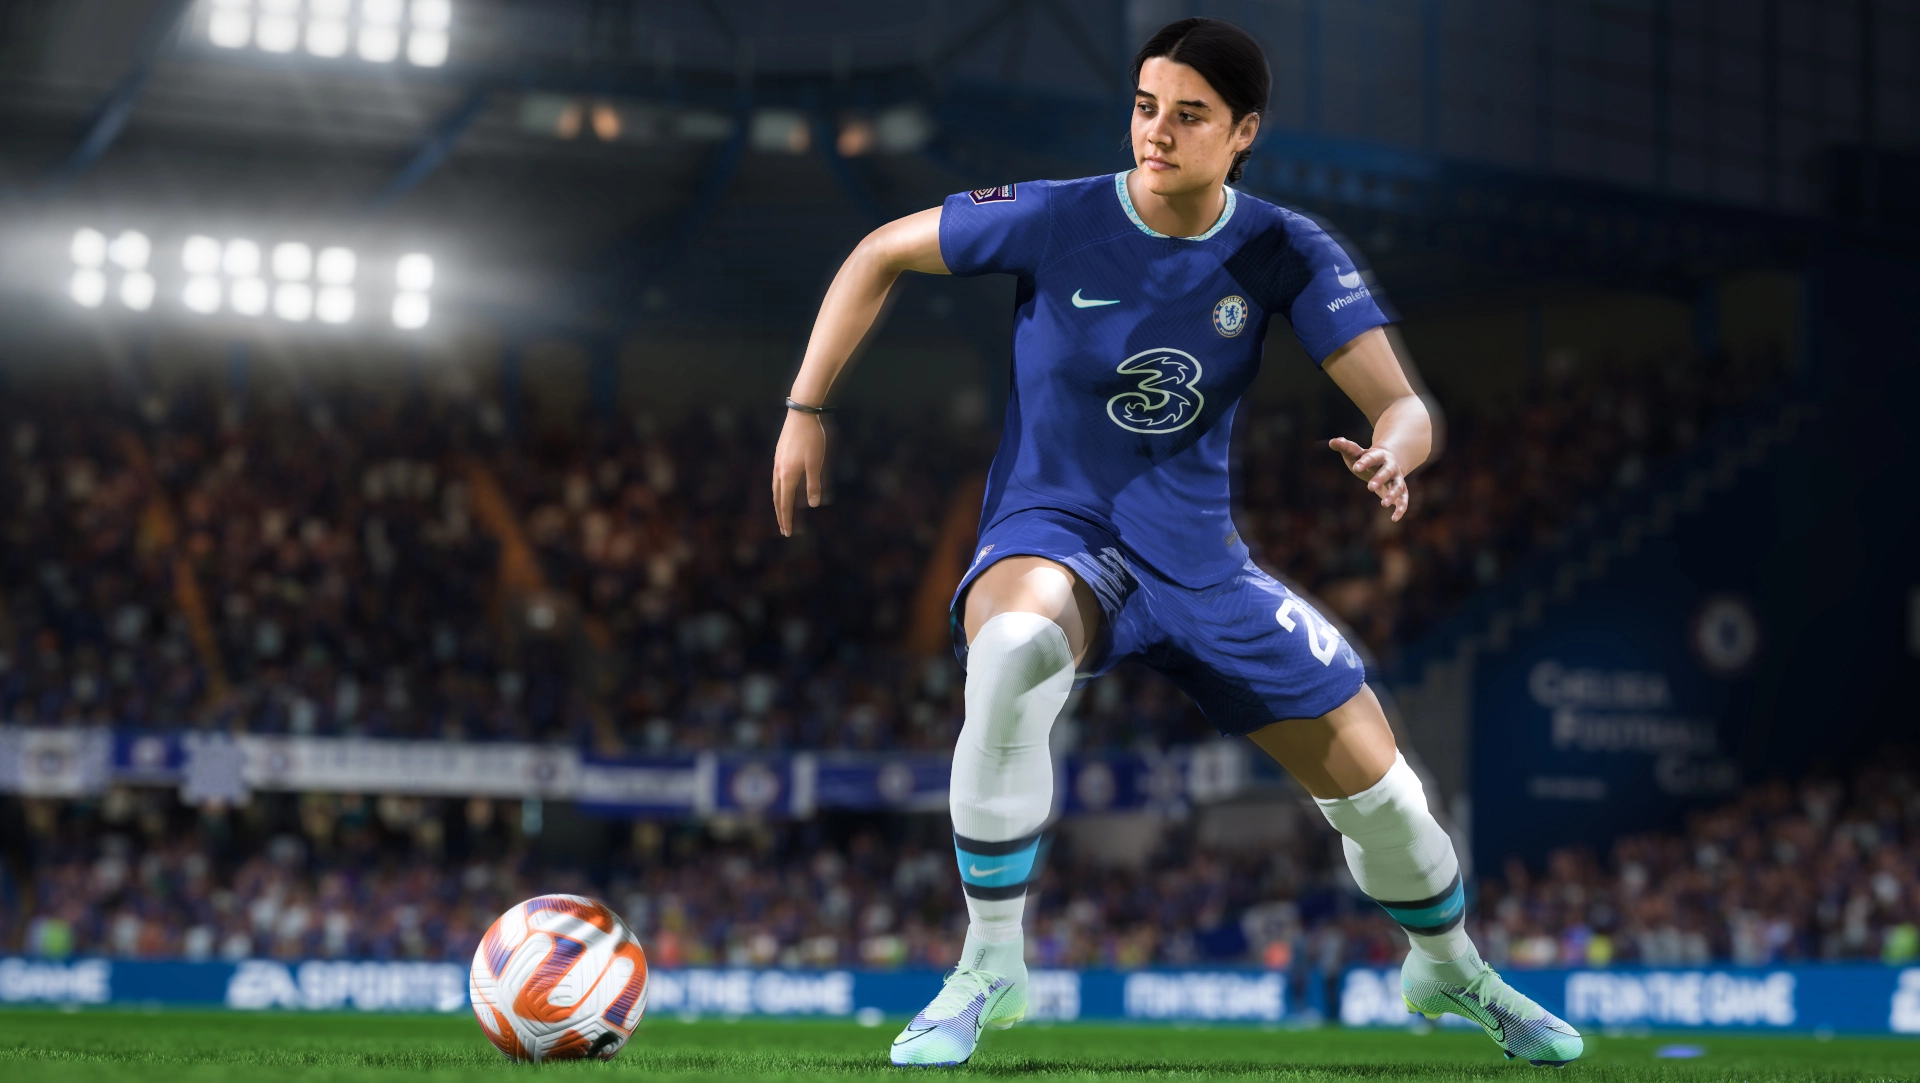 Image for Consumers have played FIFA 23 for 15.7bn minutes to date